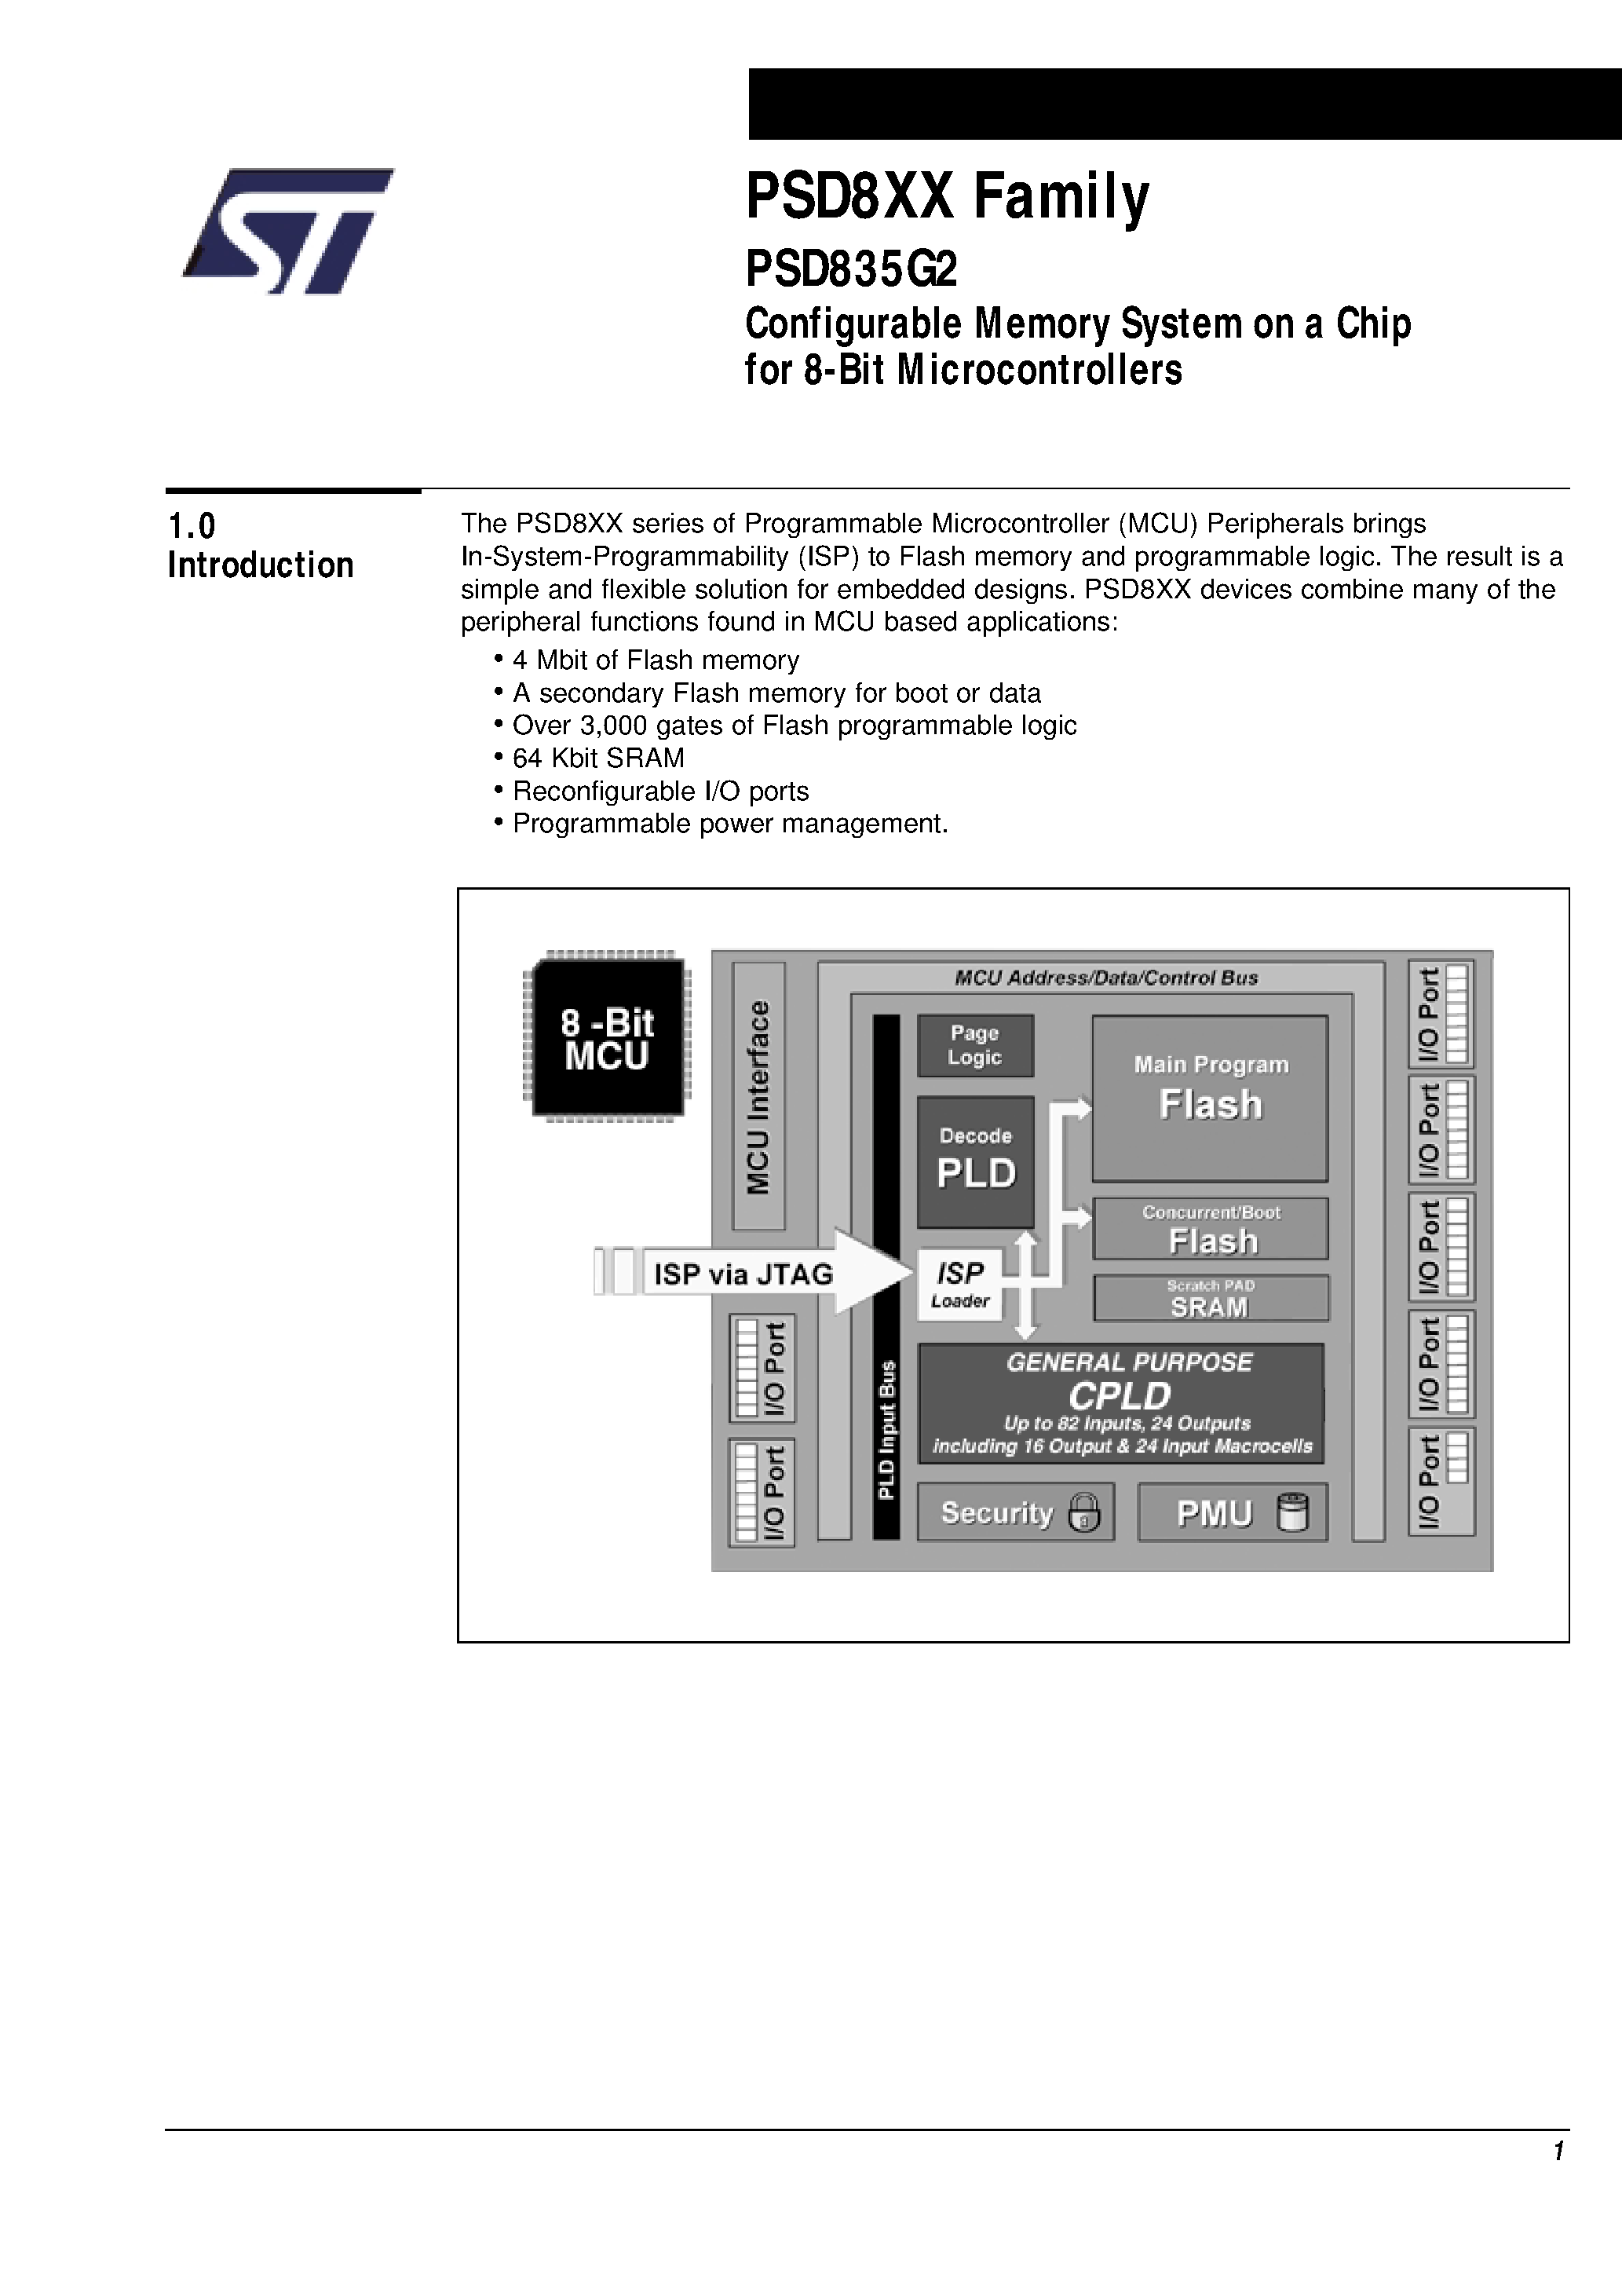 Datasheet PSD835F2-A-20B81 - Configurable Memory System on a Chip for 8-Bit Microcontrollers page 2